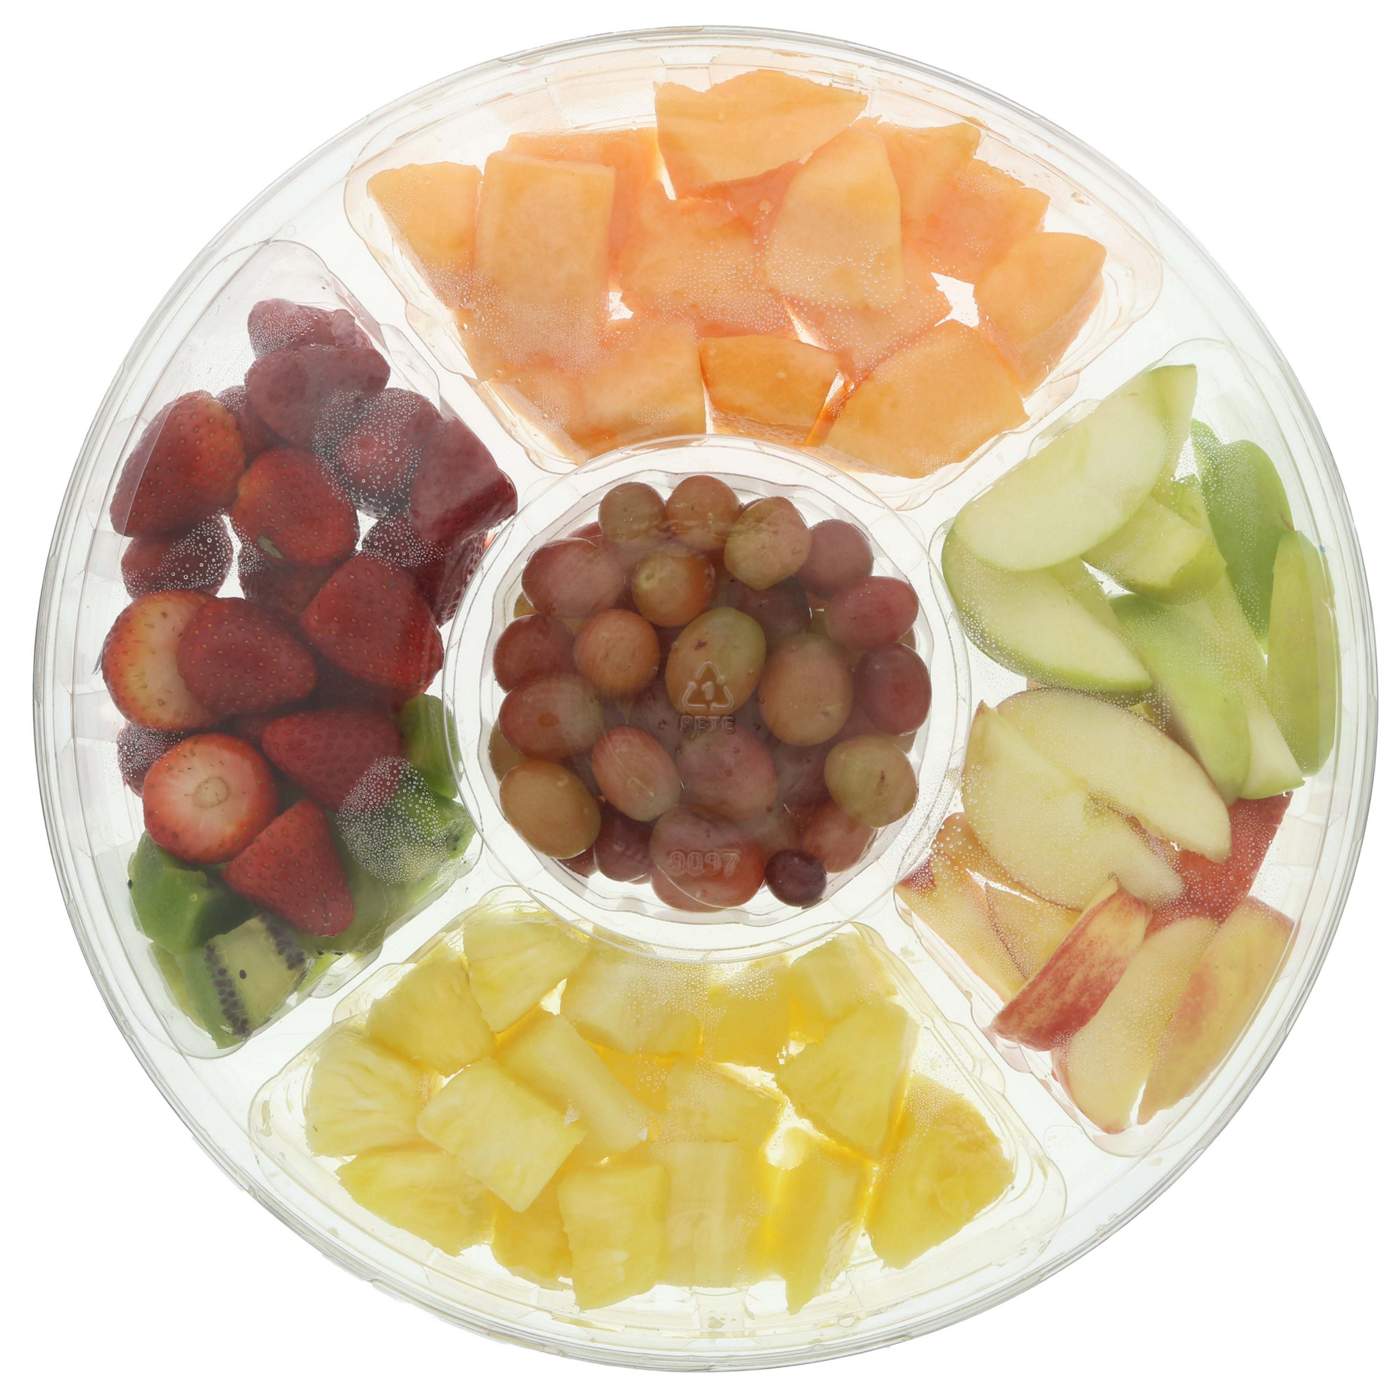 Fresh Fruit Party Tray - Deluxe; image 1 of 2